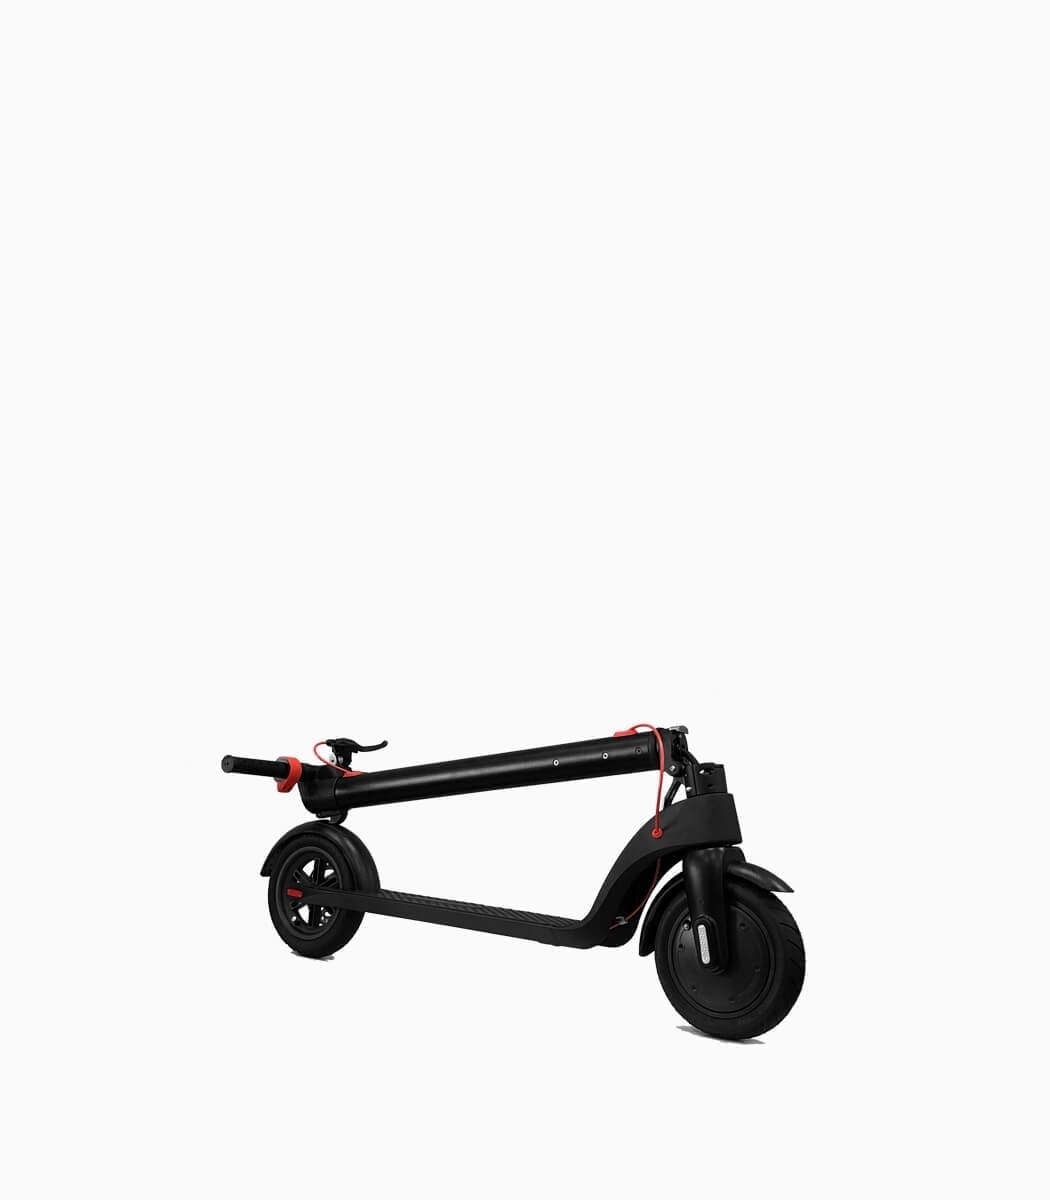 MOBOT X7 (BLACK6.4AH) UL2272 electric scooter folded angled right